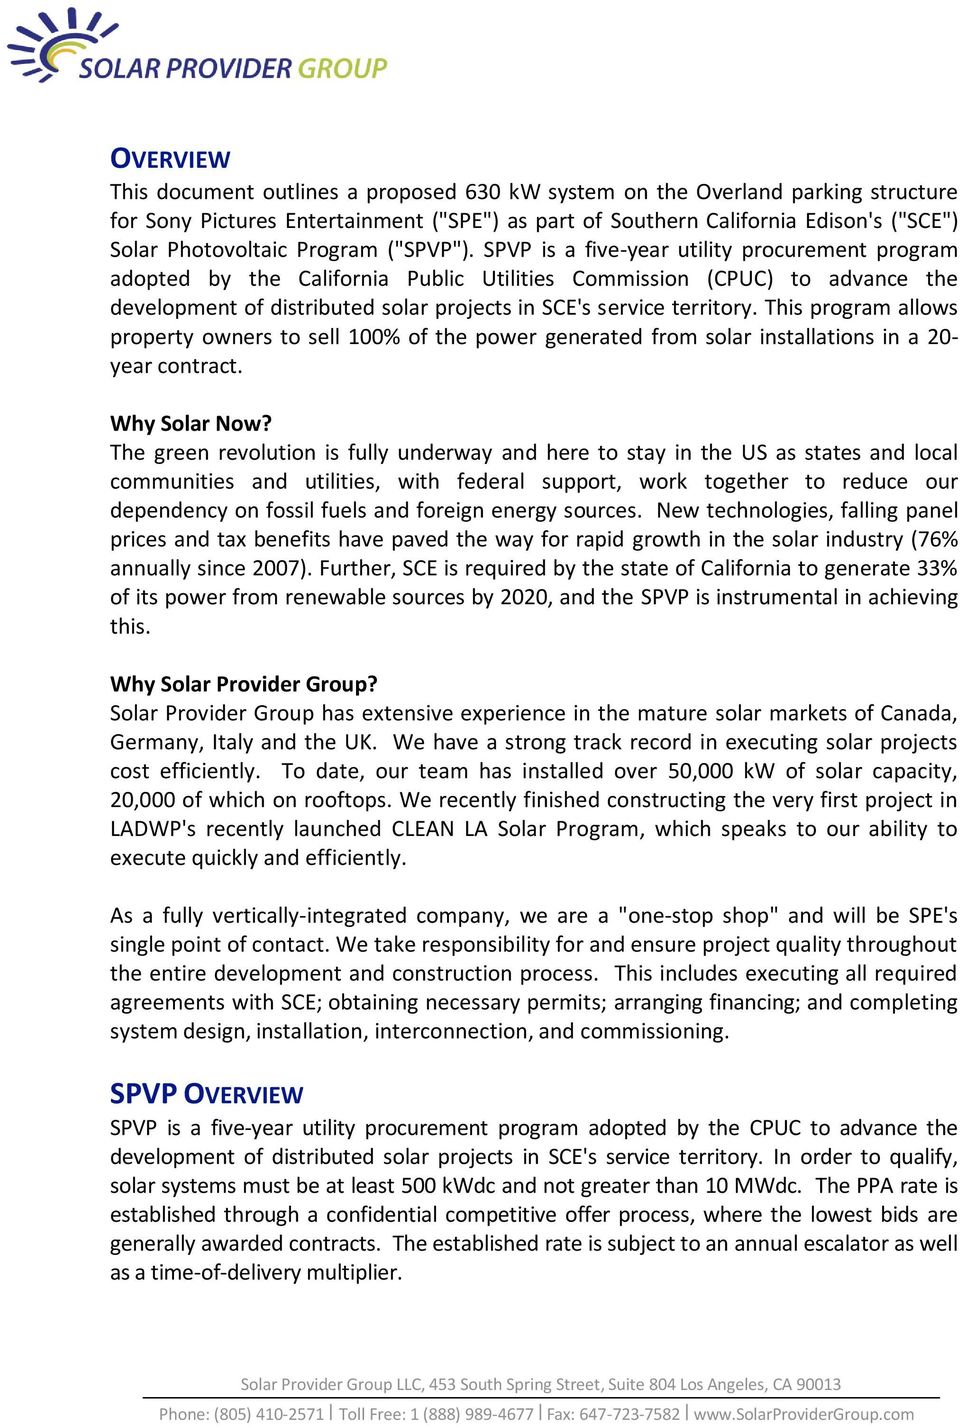 SPVP is a five-year utility procurement program adopted by the California Public Utilities Commission (CPUC) to advance the development of distributed solar projects in SCE's service territory.